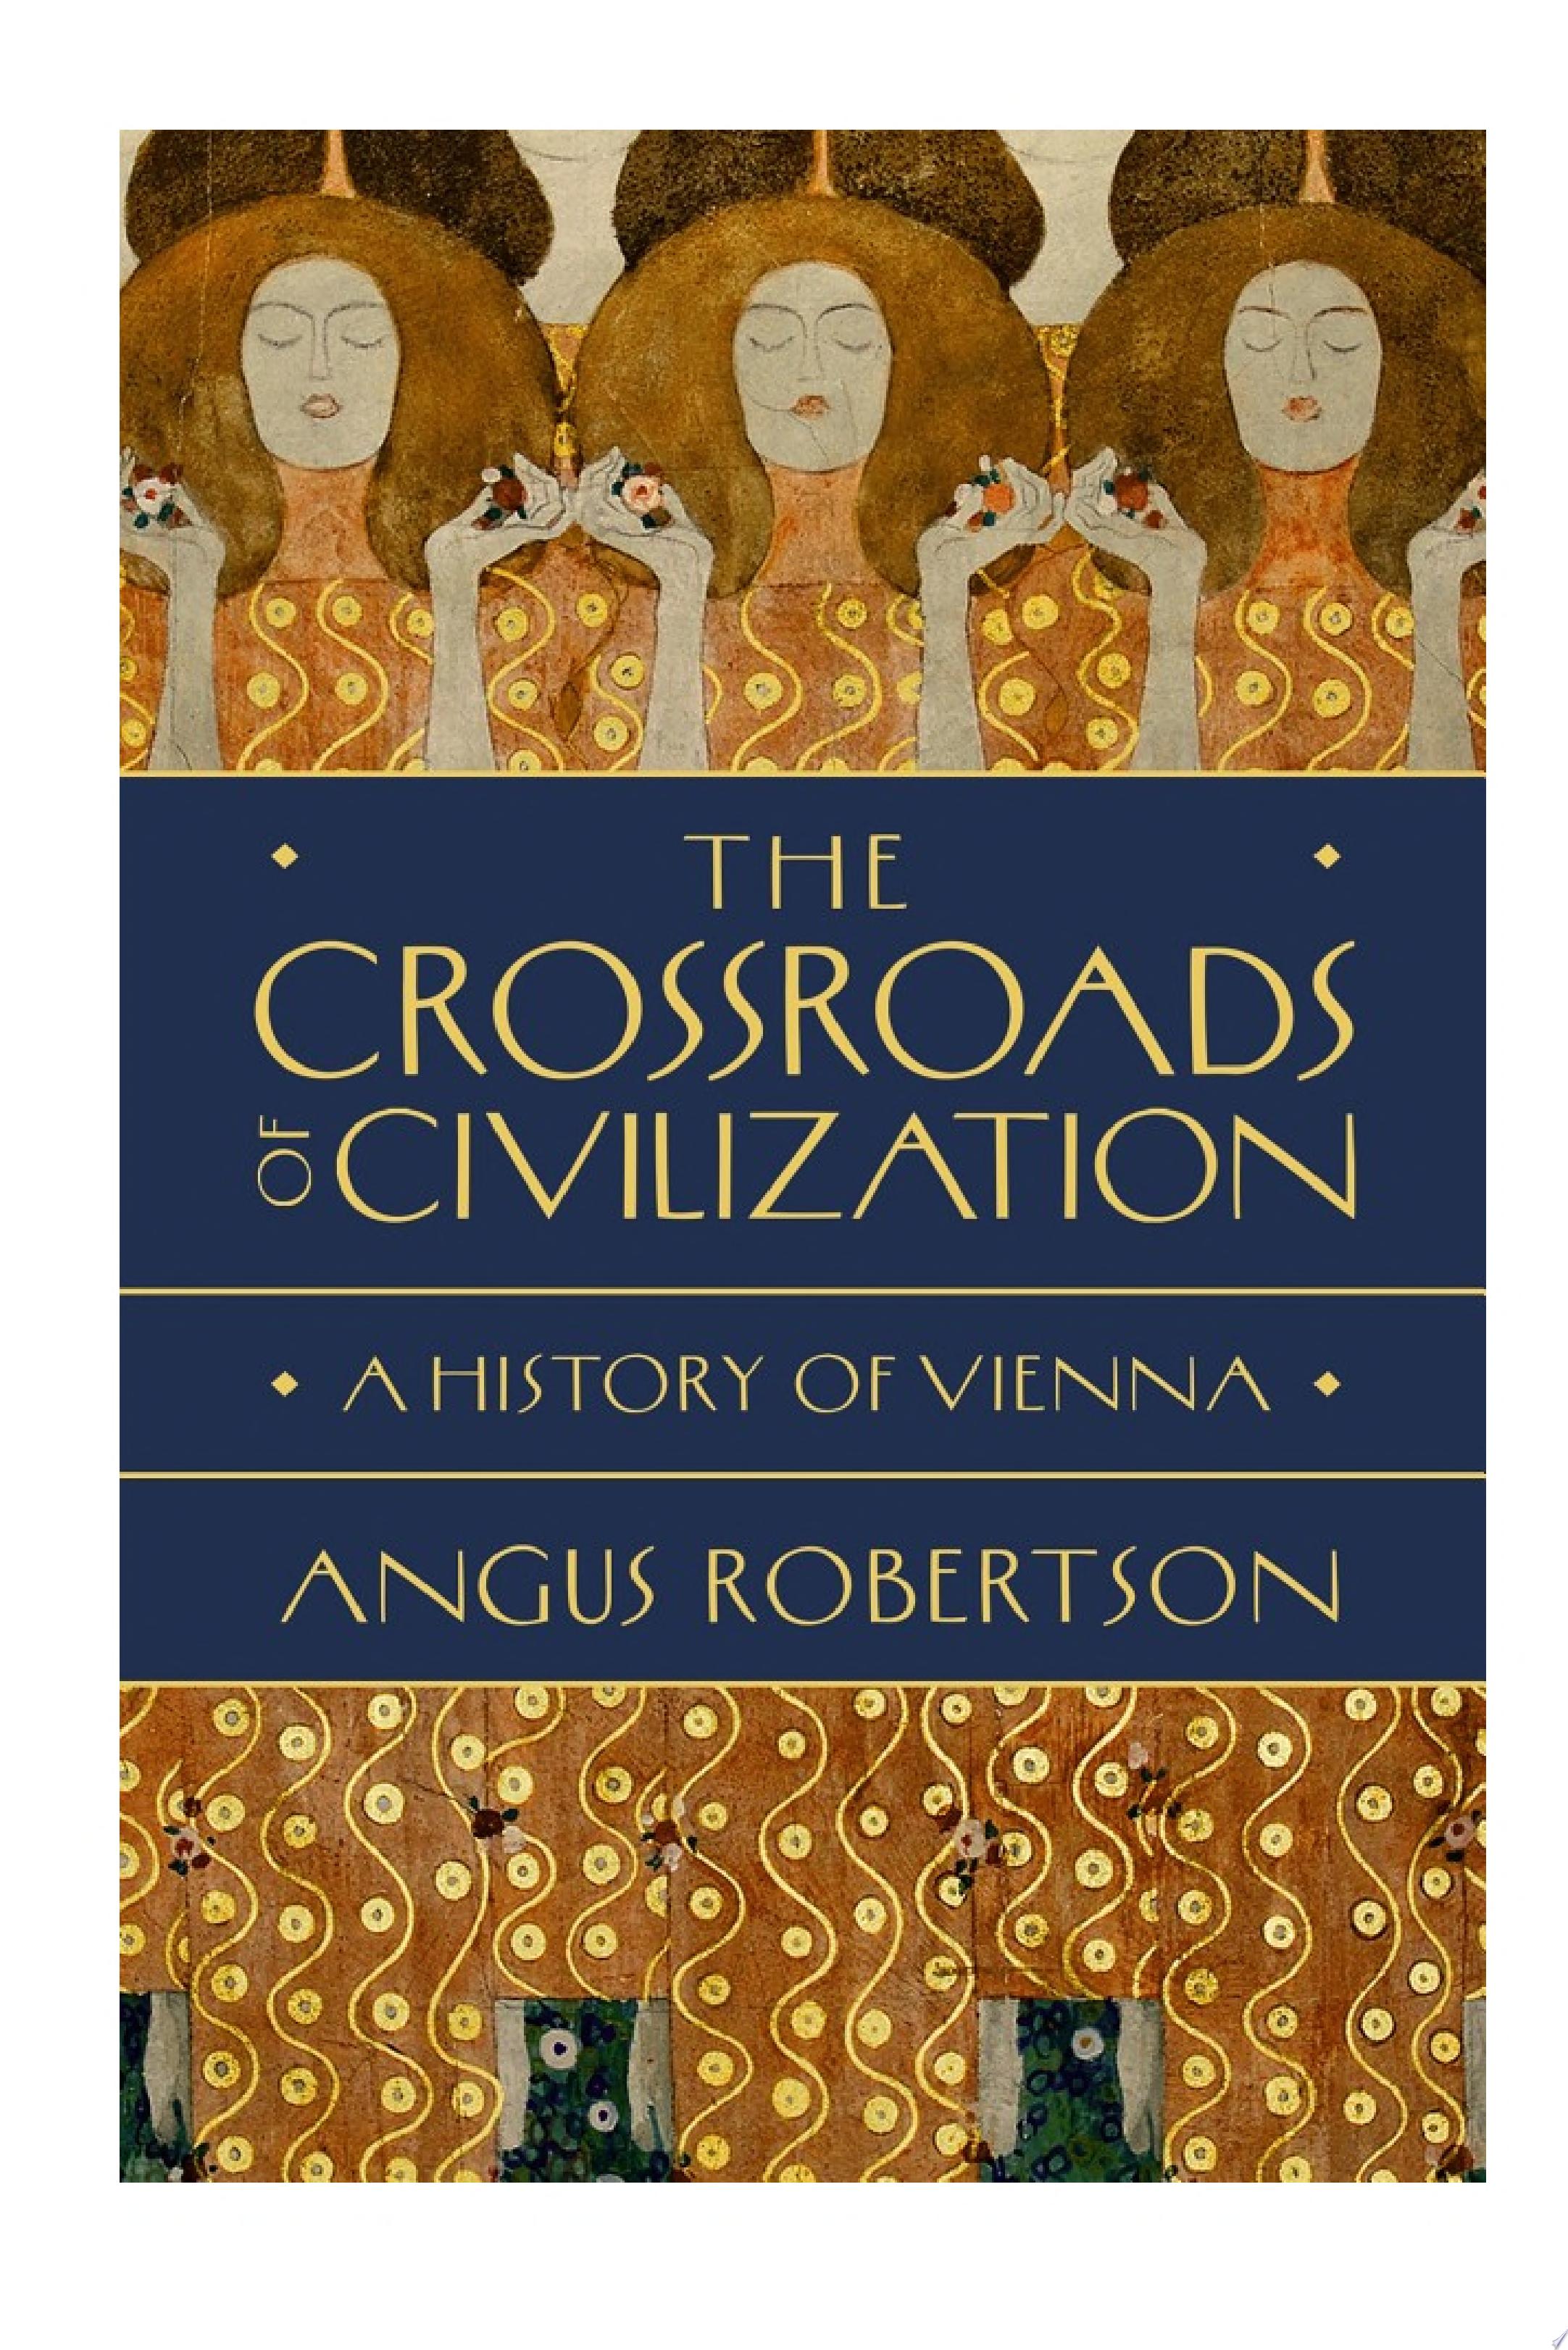 Image for "The Crossroads of Civilization"